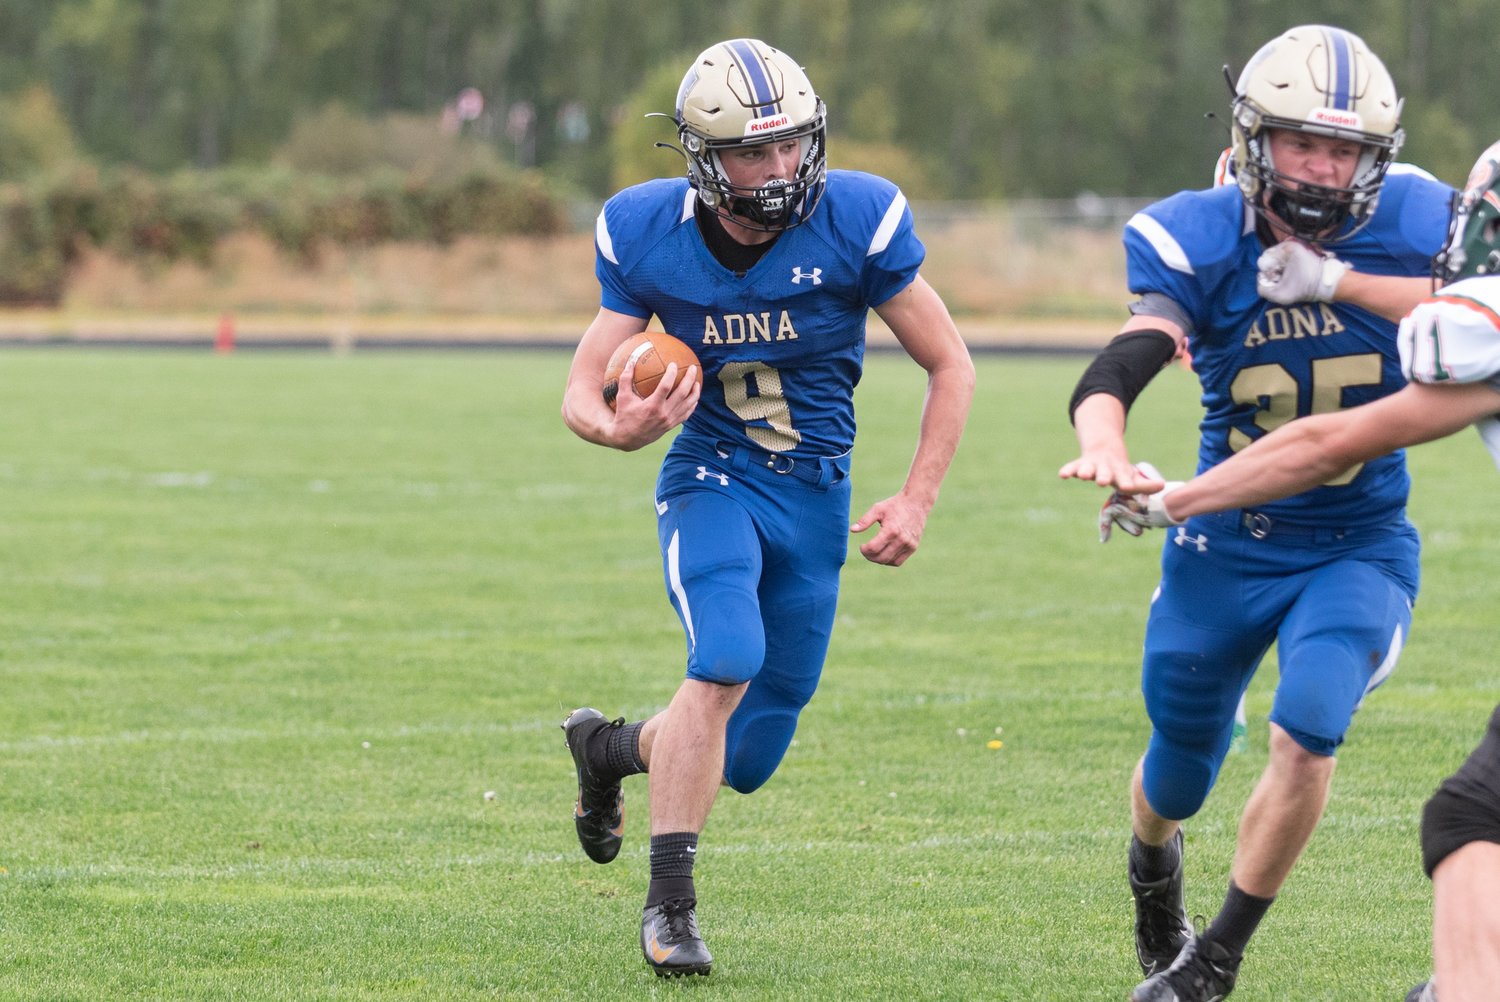 Adna tailback Tristan Ridley takes a carry for a big gain in the Pirates win over Morton-White Pass Saturday afternoon.